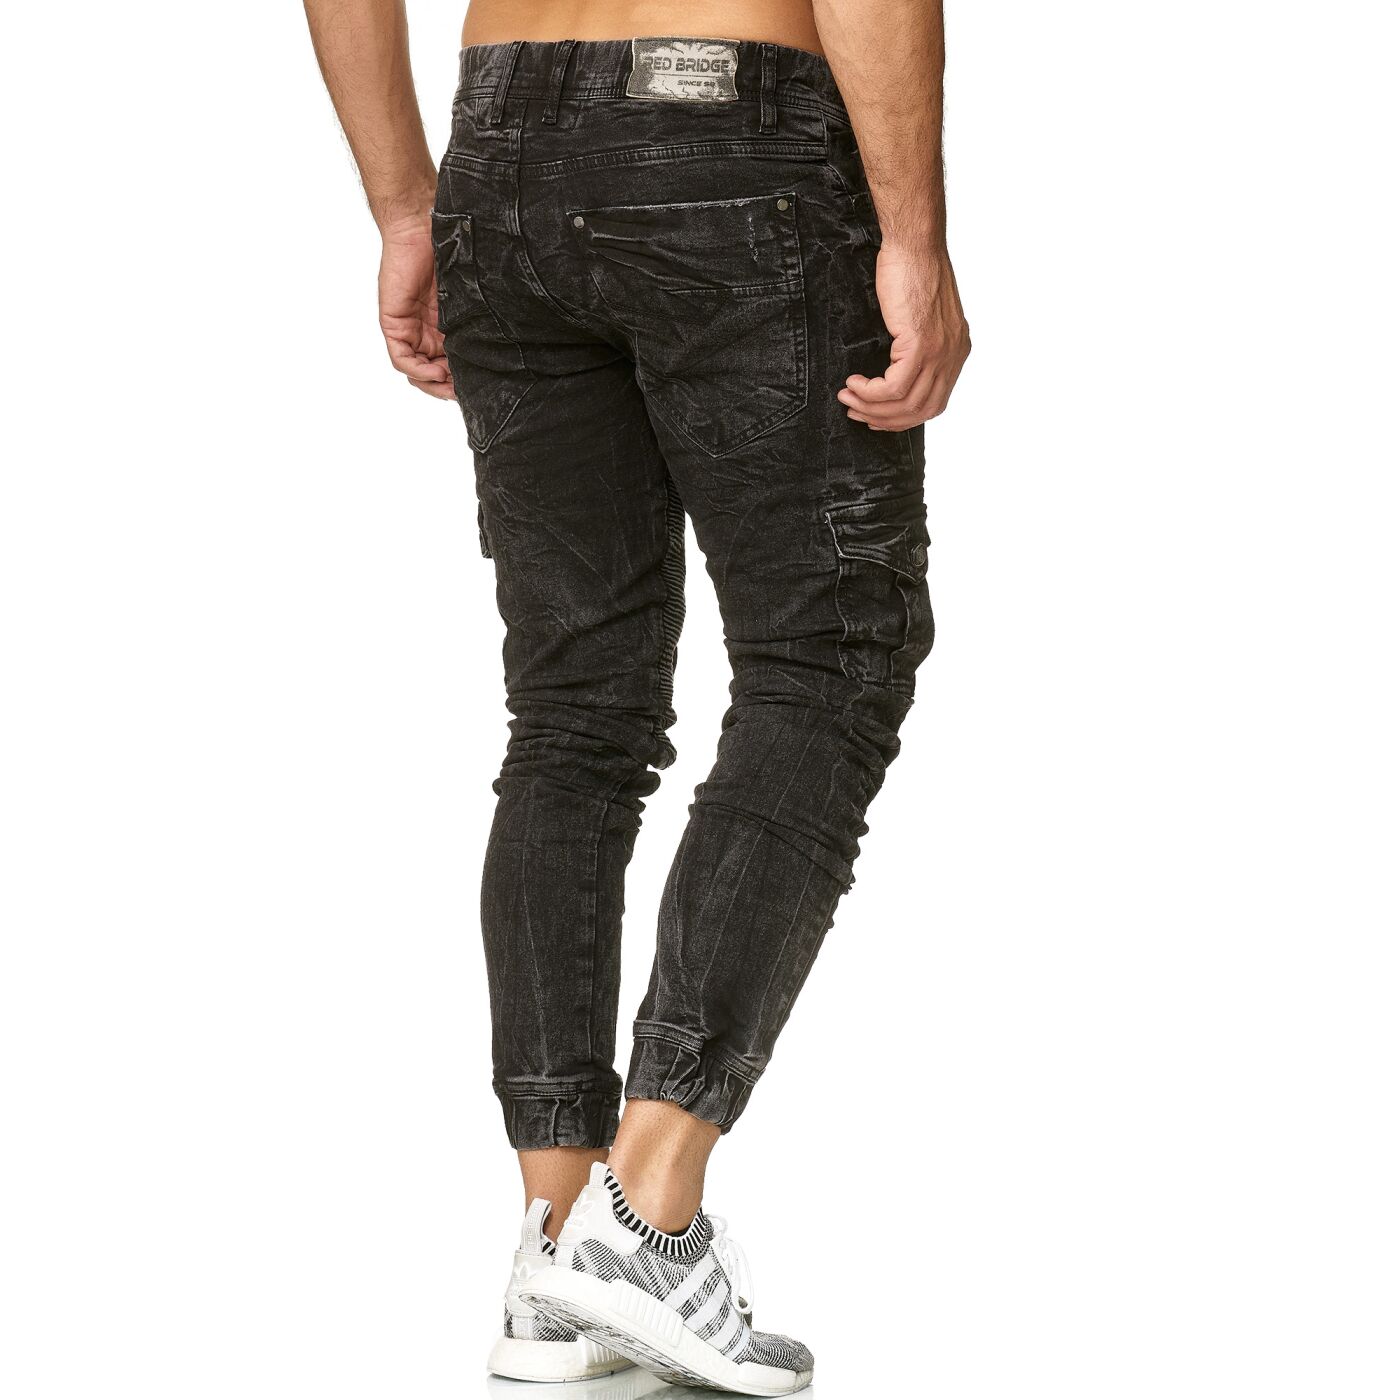 joggers jeans pant for man